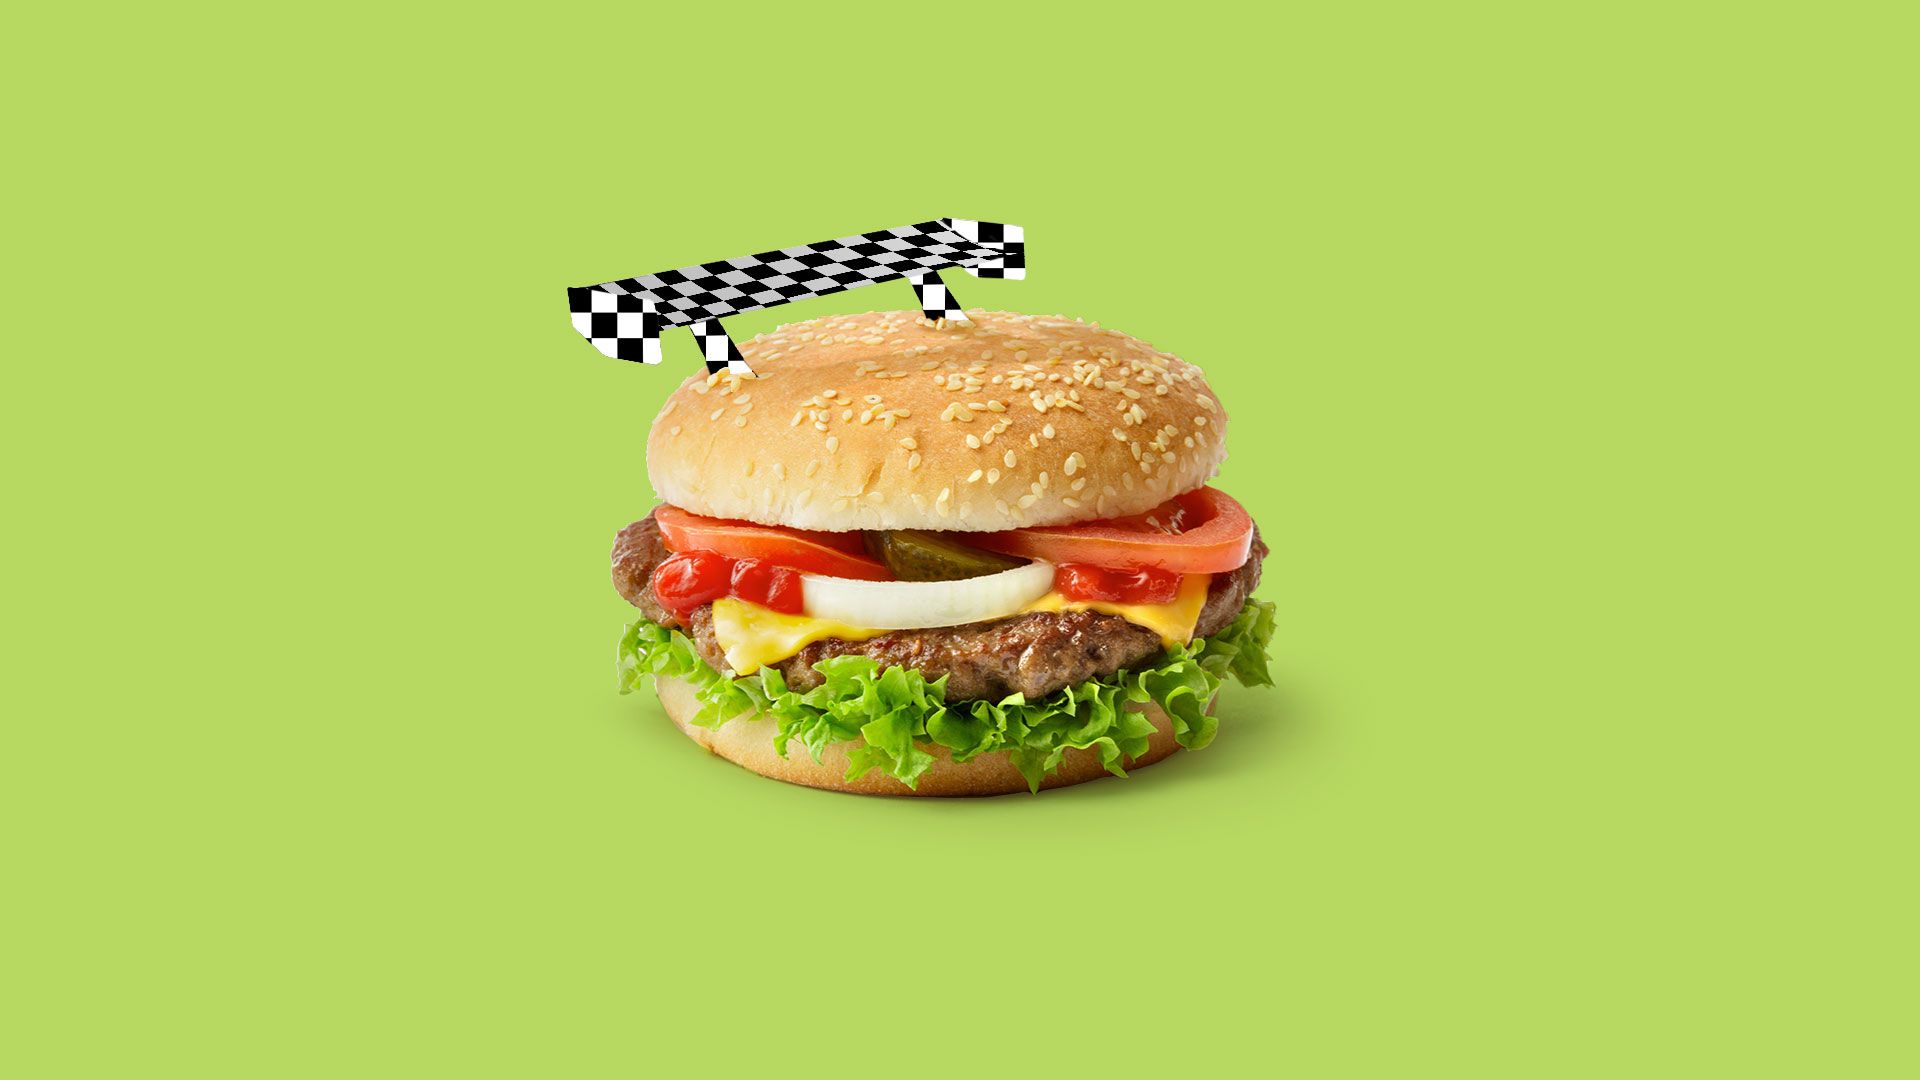 Illustration of a cheeseburger with a checkered spoiler.